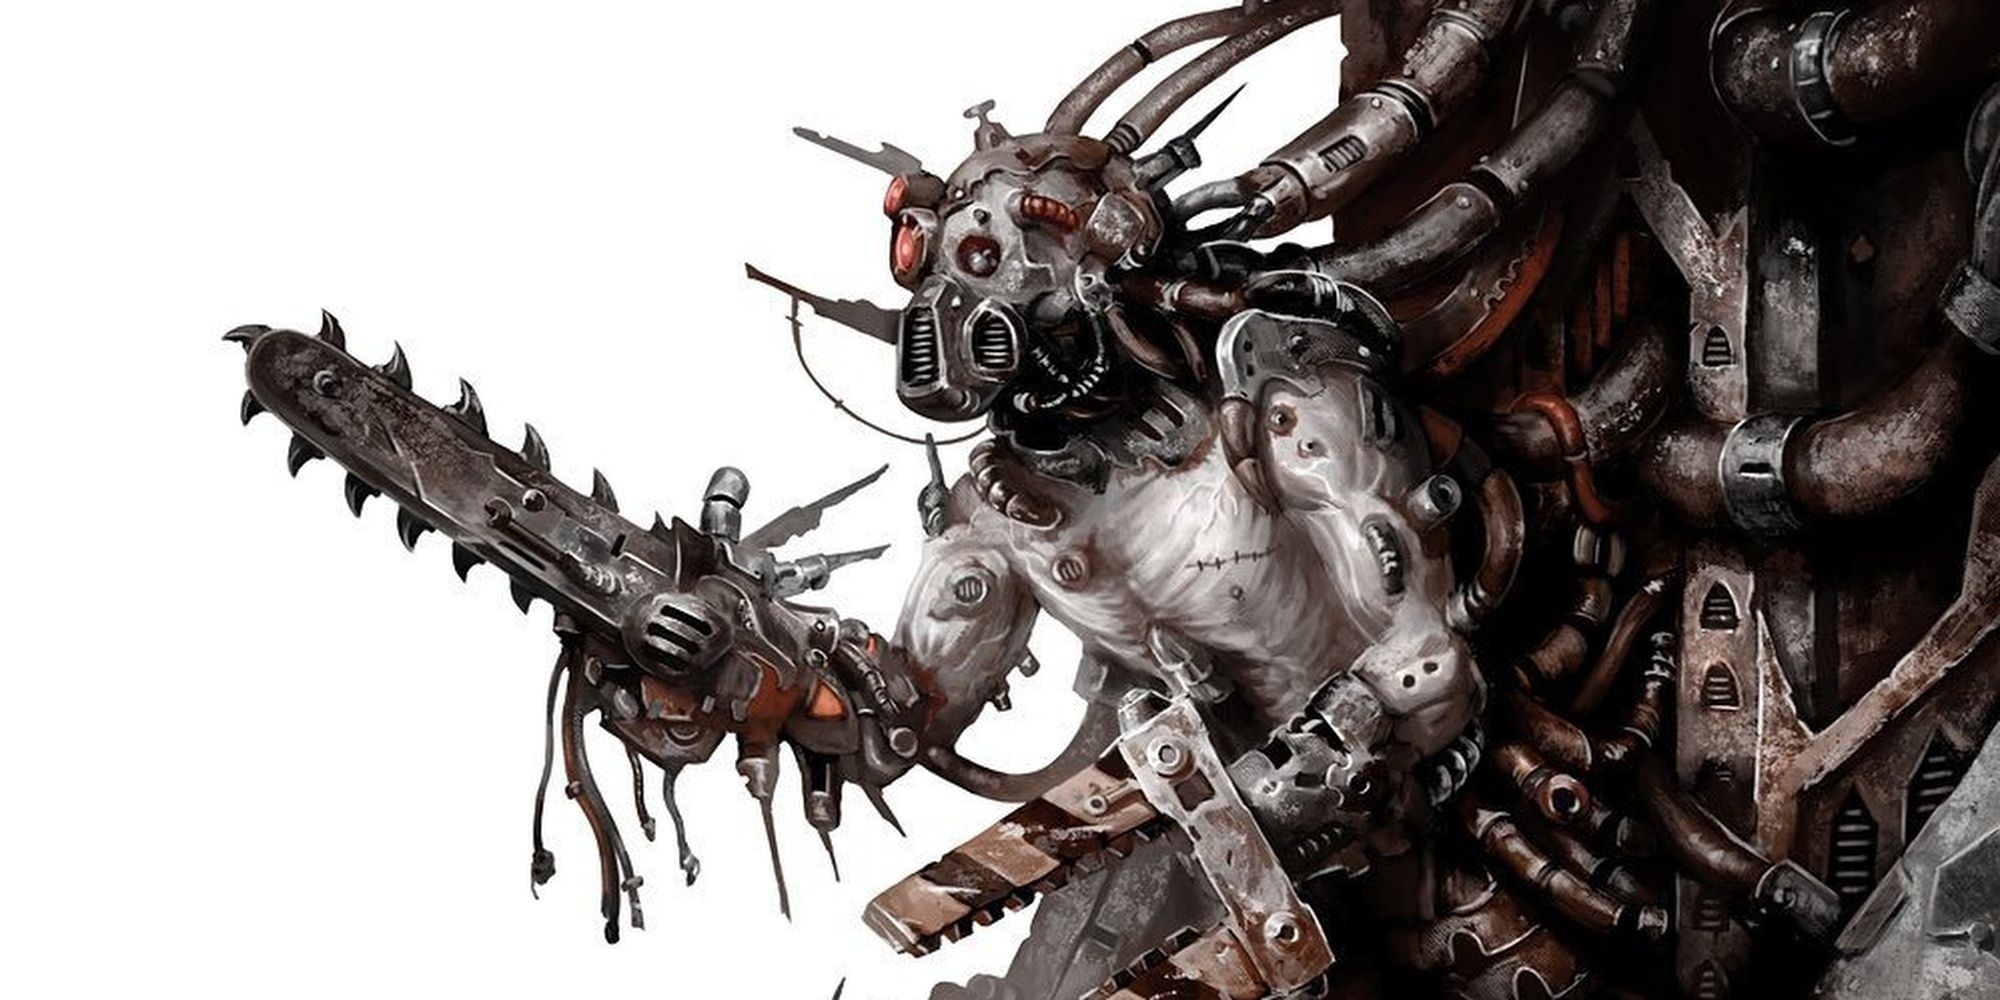 Warhammer 40K: An Example Of Someone Turned Into A Cyborg Servitor